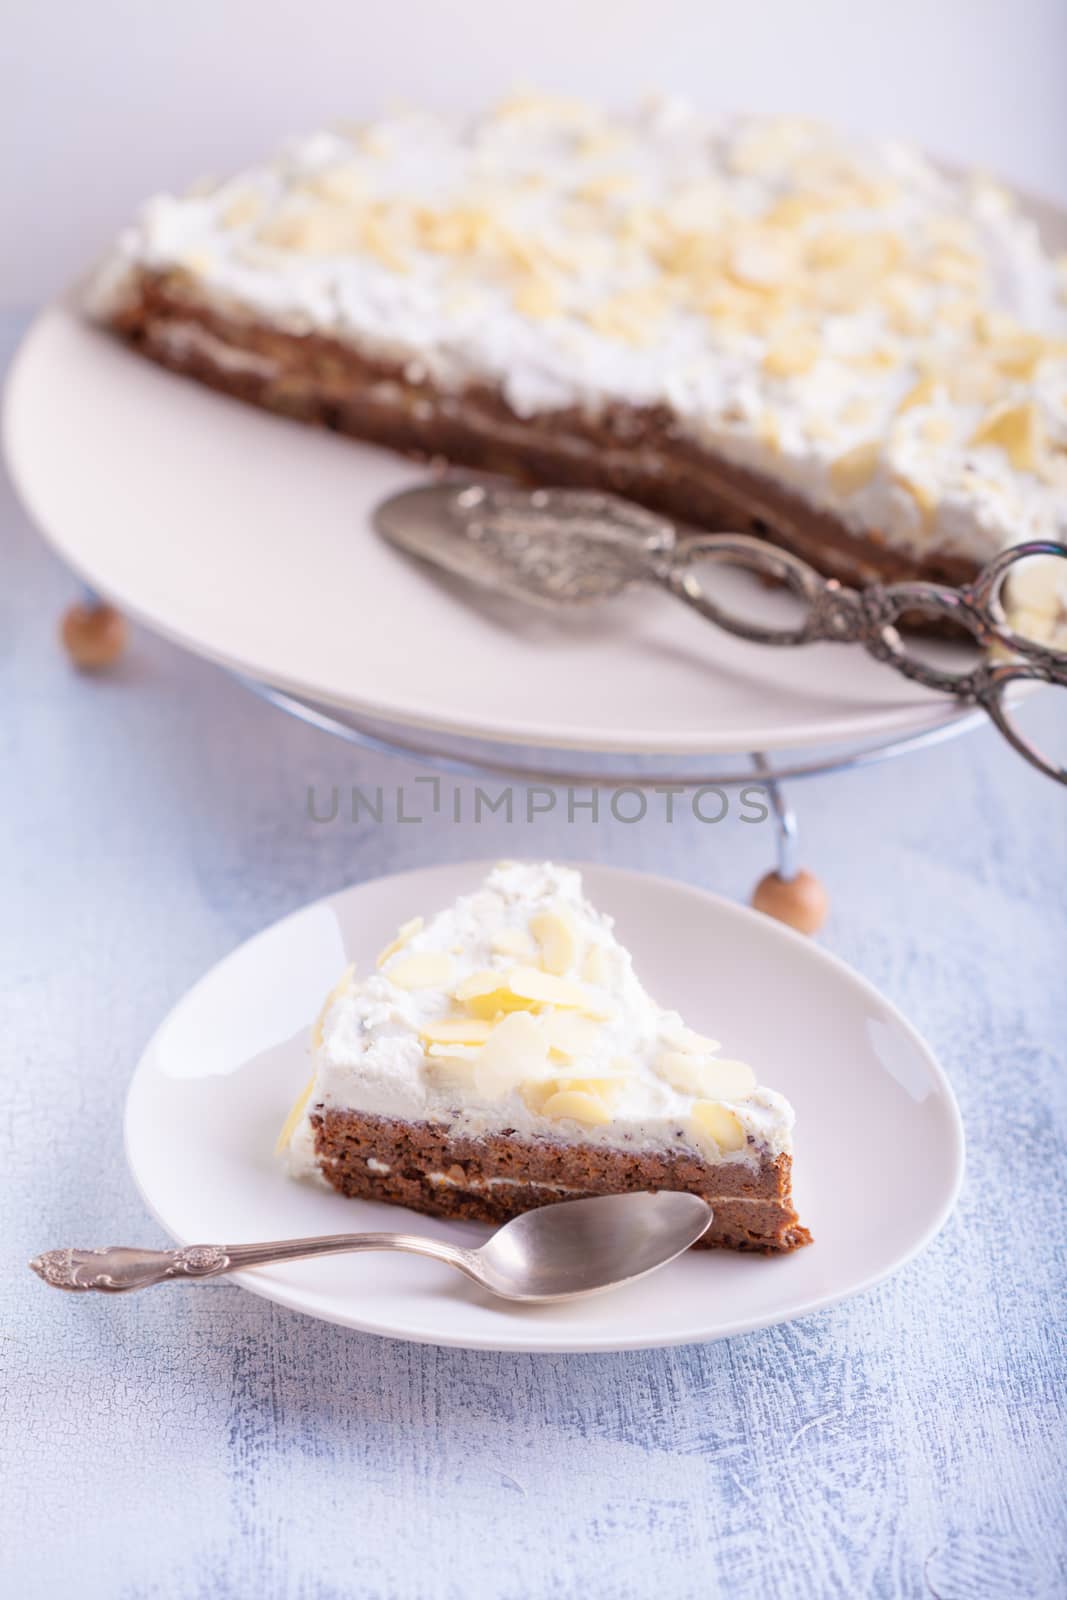 Slice of carrot cake, gluten-free by supercat67